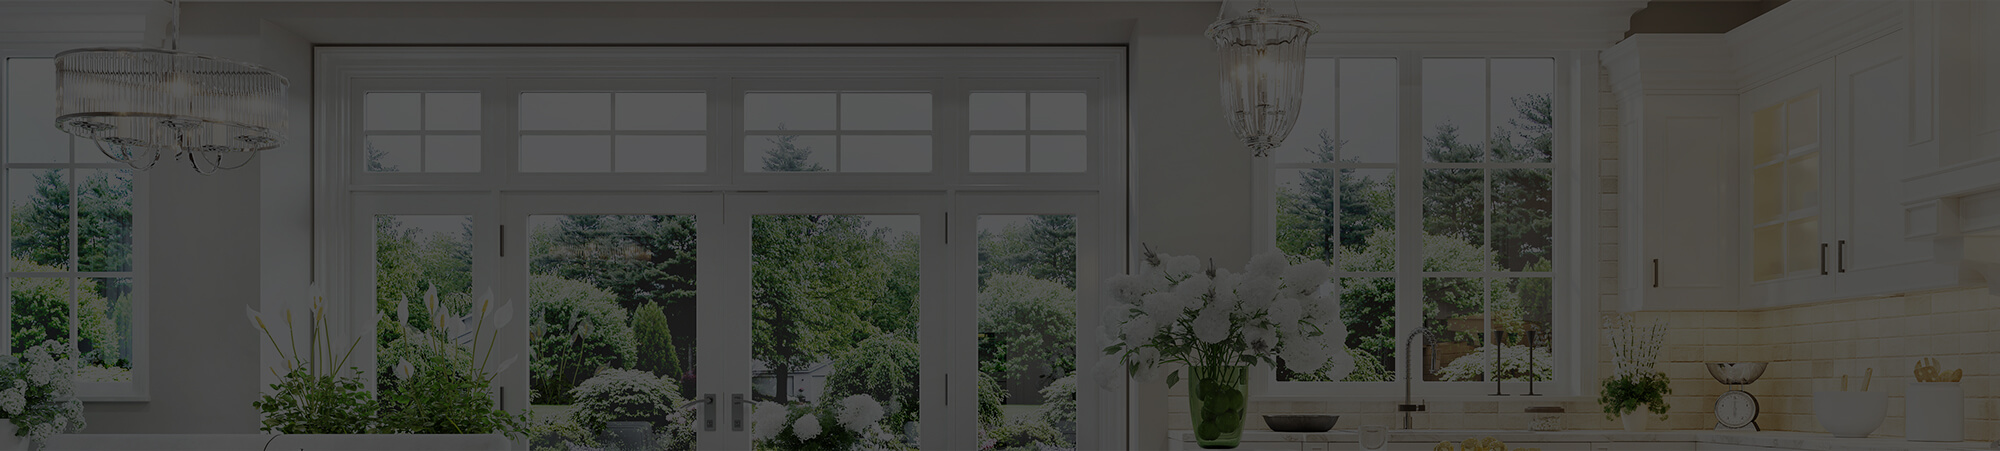 window installation and replacement services in neenah wi